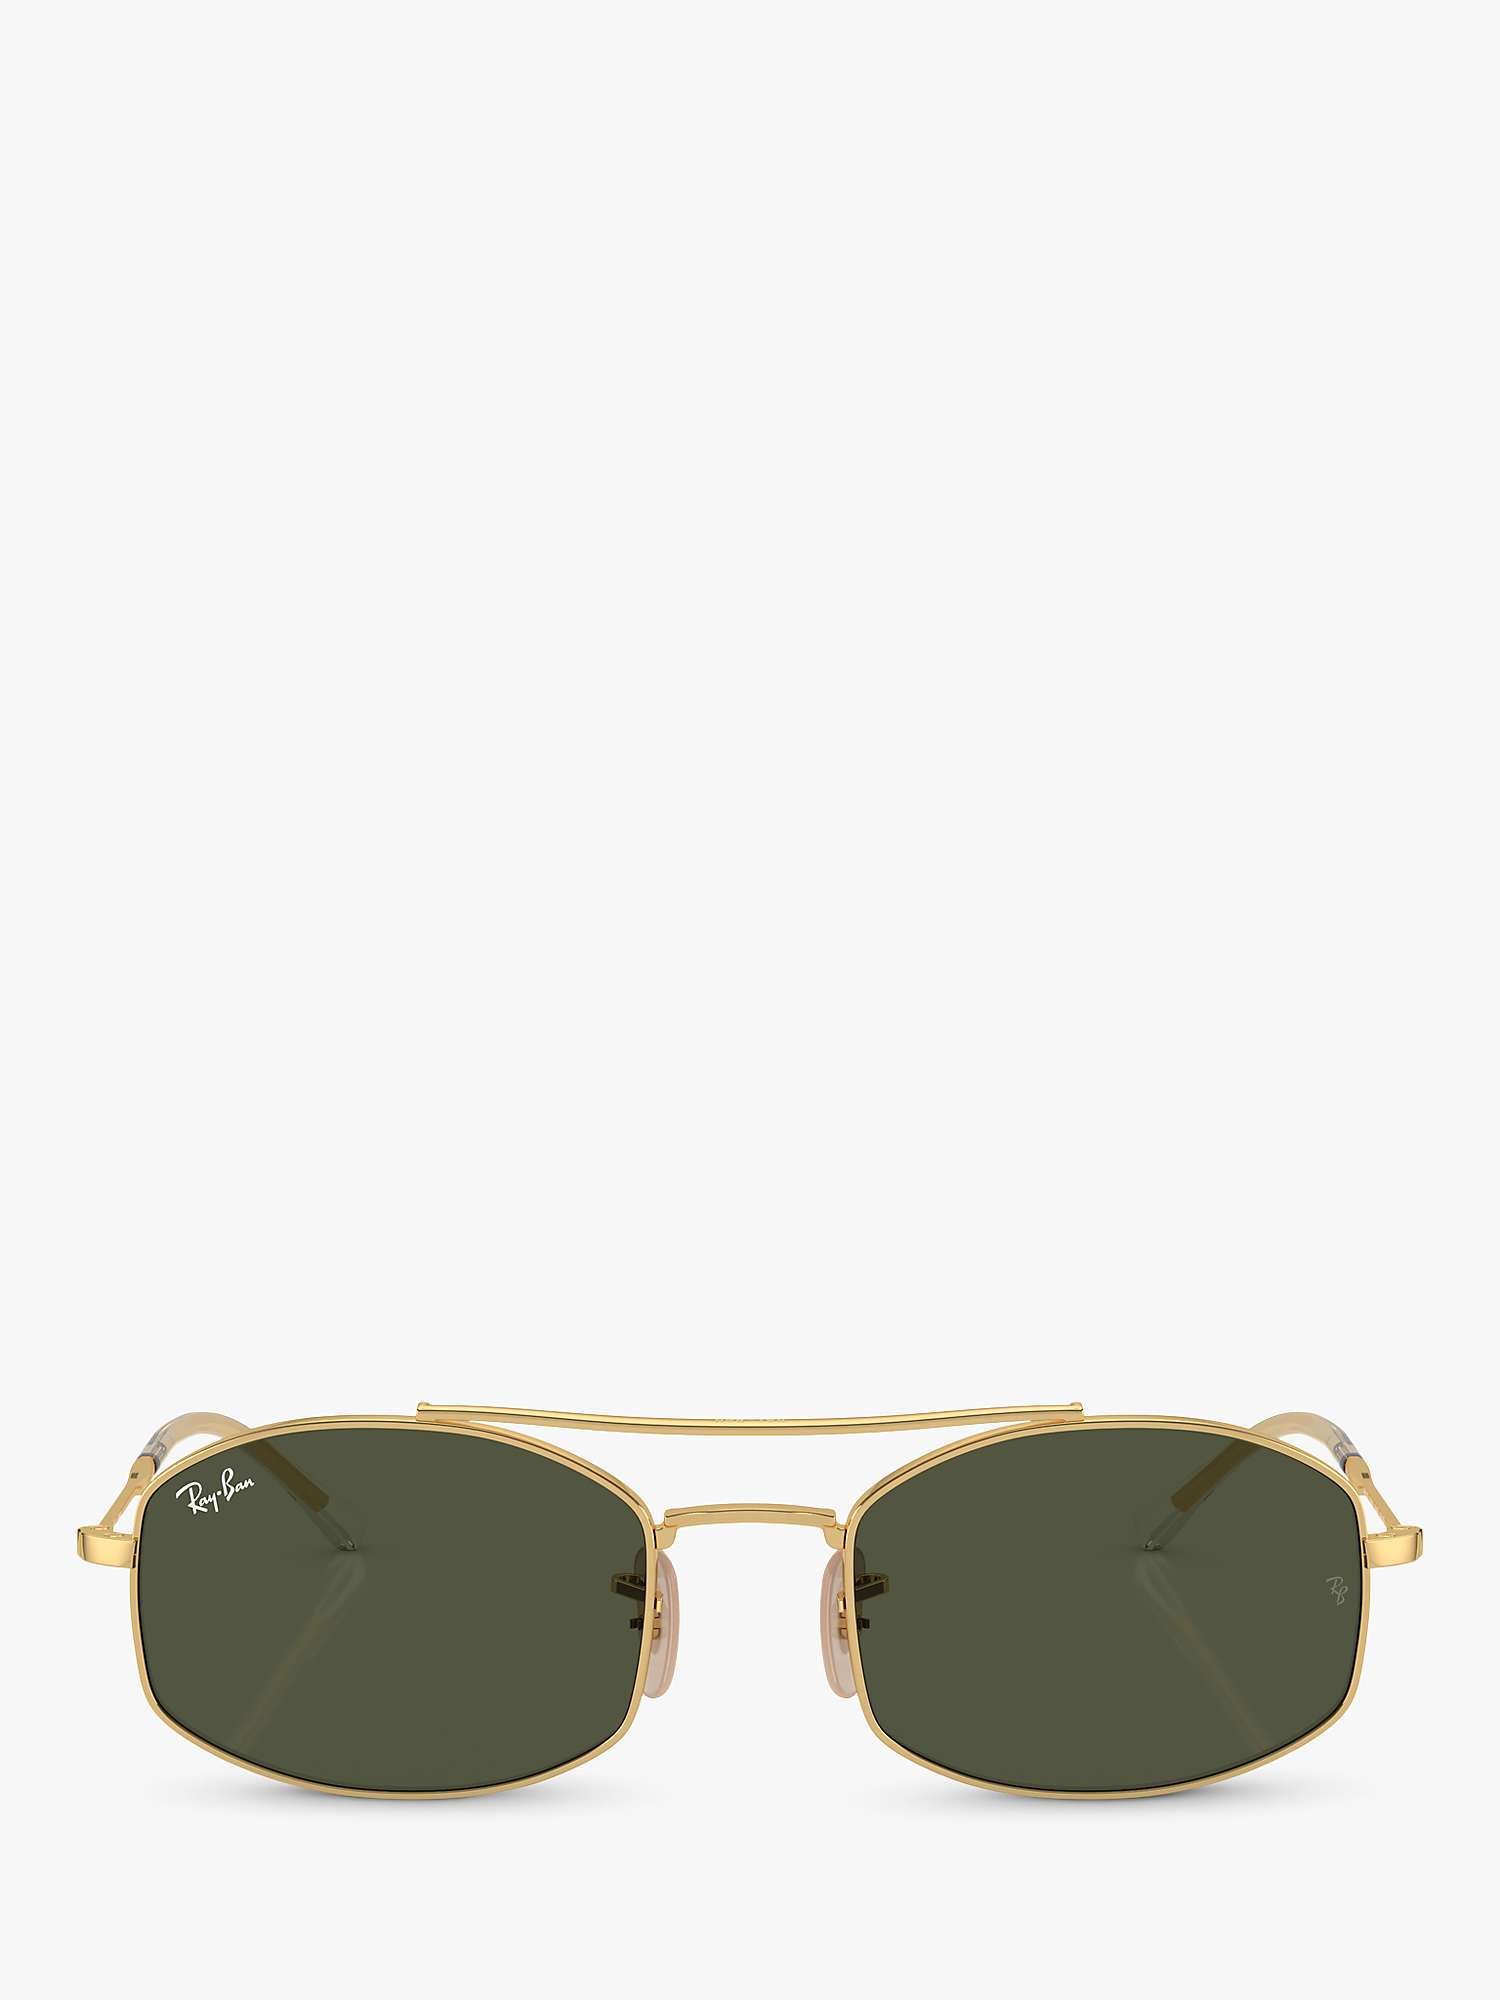 Buy Ray-Ban RB3719 Unisex Oval Sunglasses, Gold/Green Online at johnlewis.com